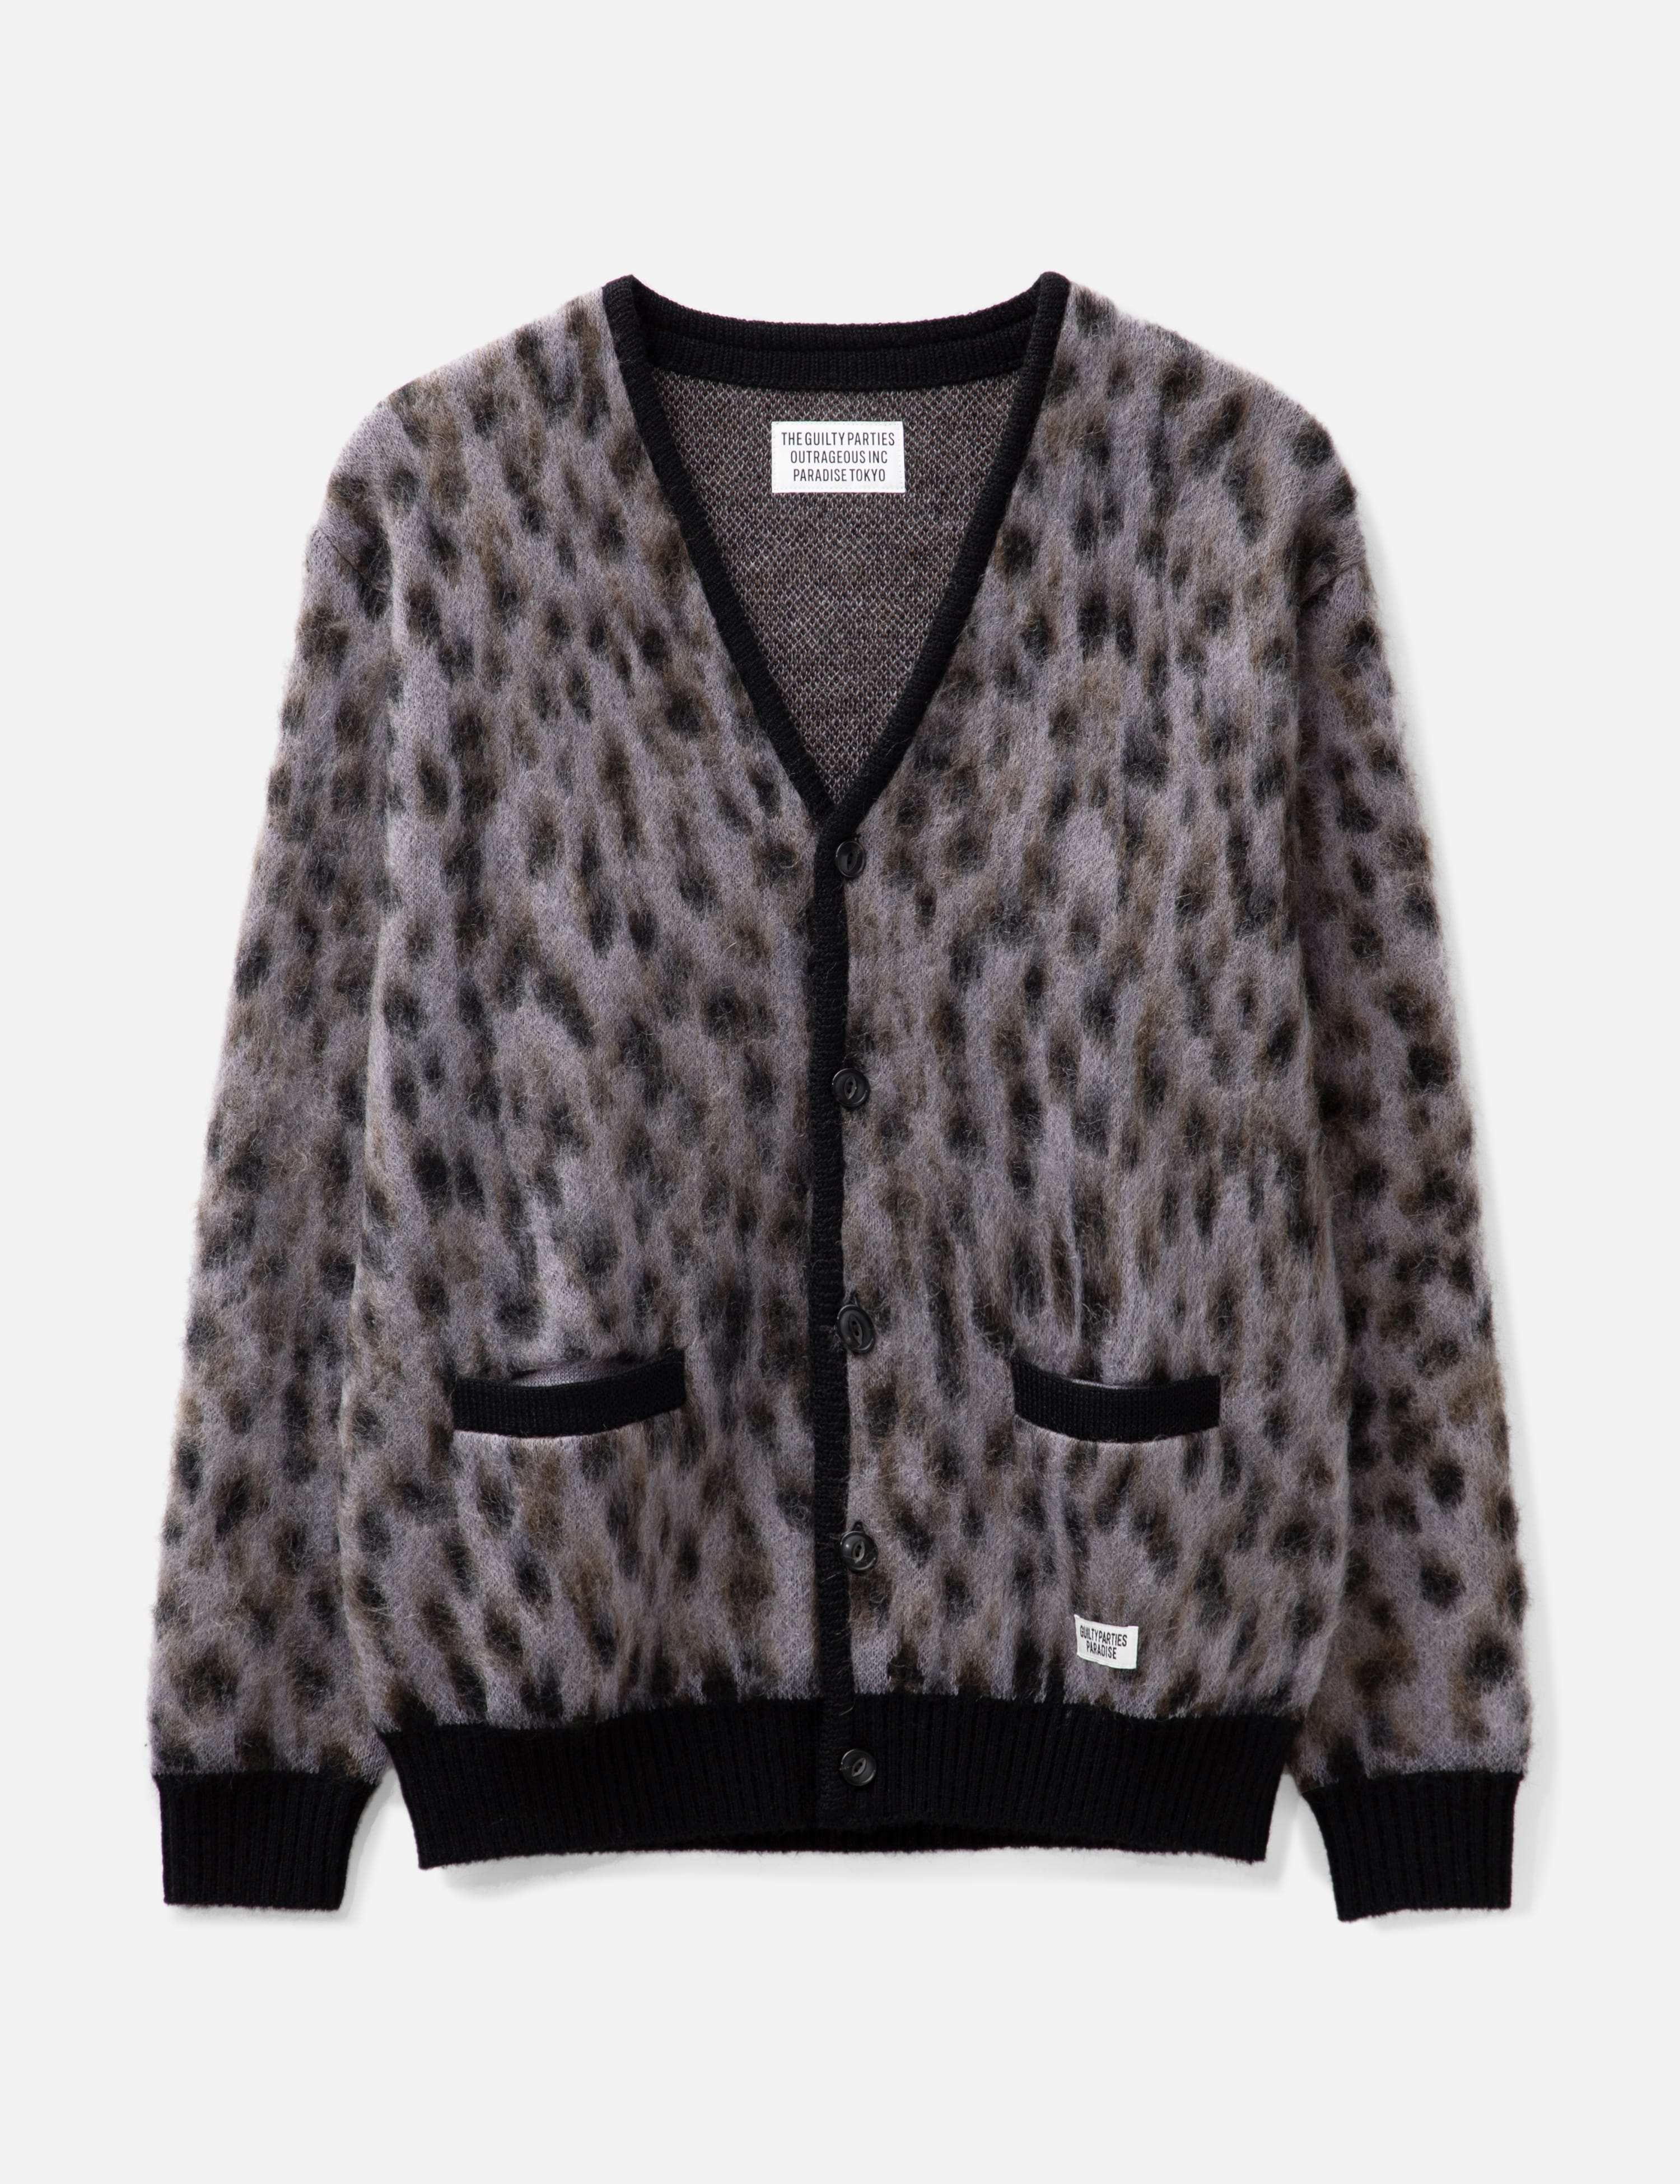 Wacko Maria - Leopard Mohair Cardigan (Type-1) | HBX - Globally Curated  Fashion and Lifestyle by Hypebeast